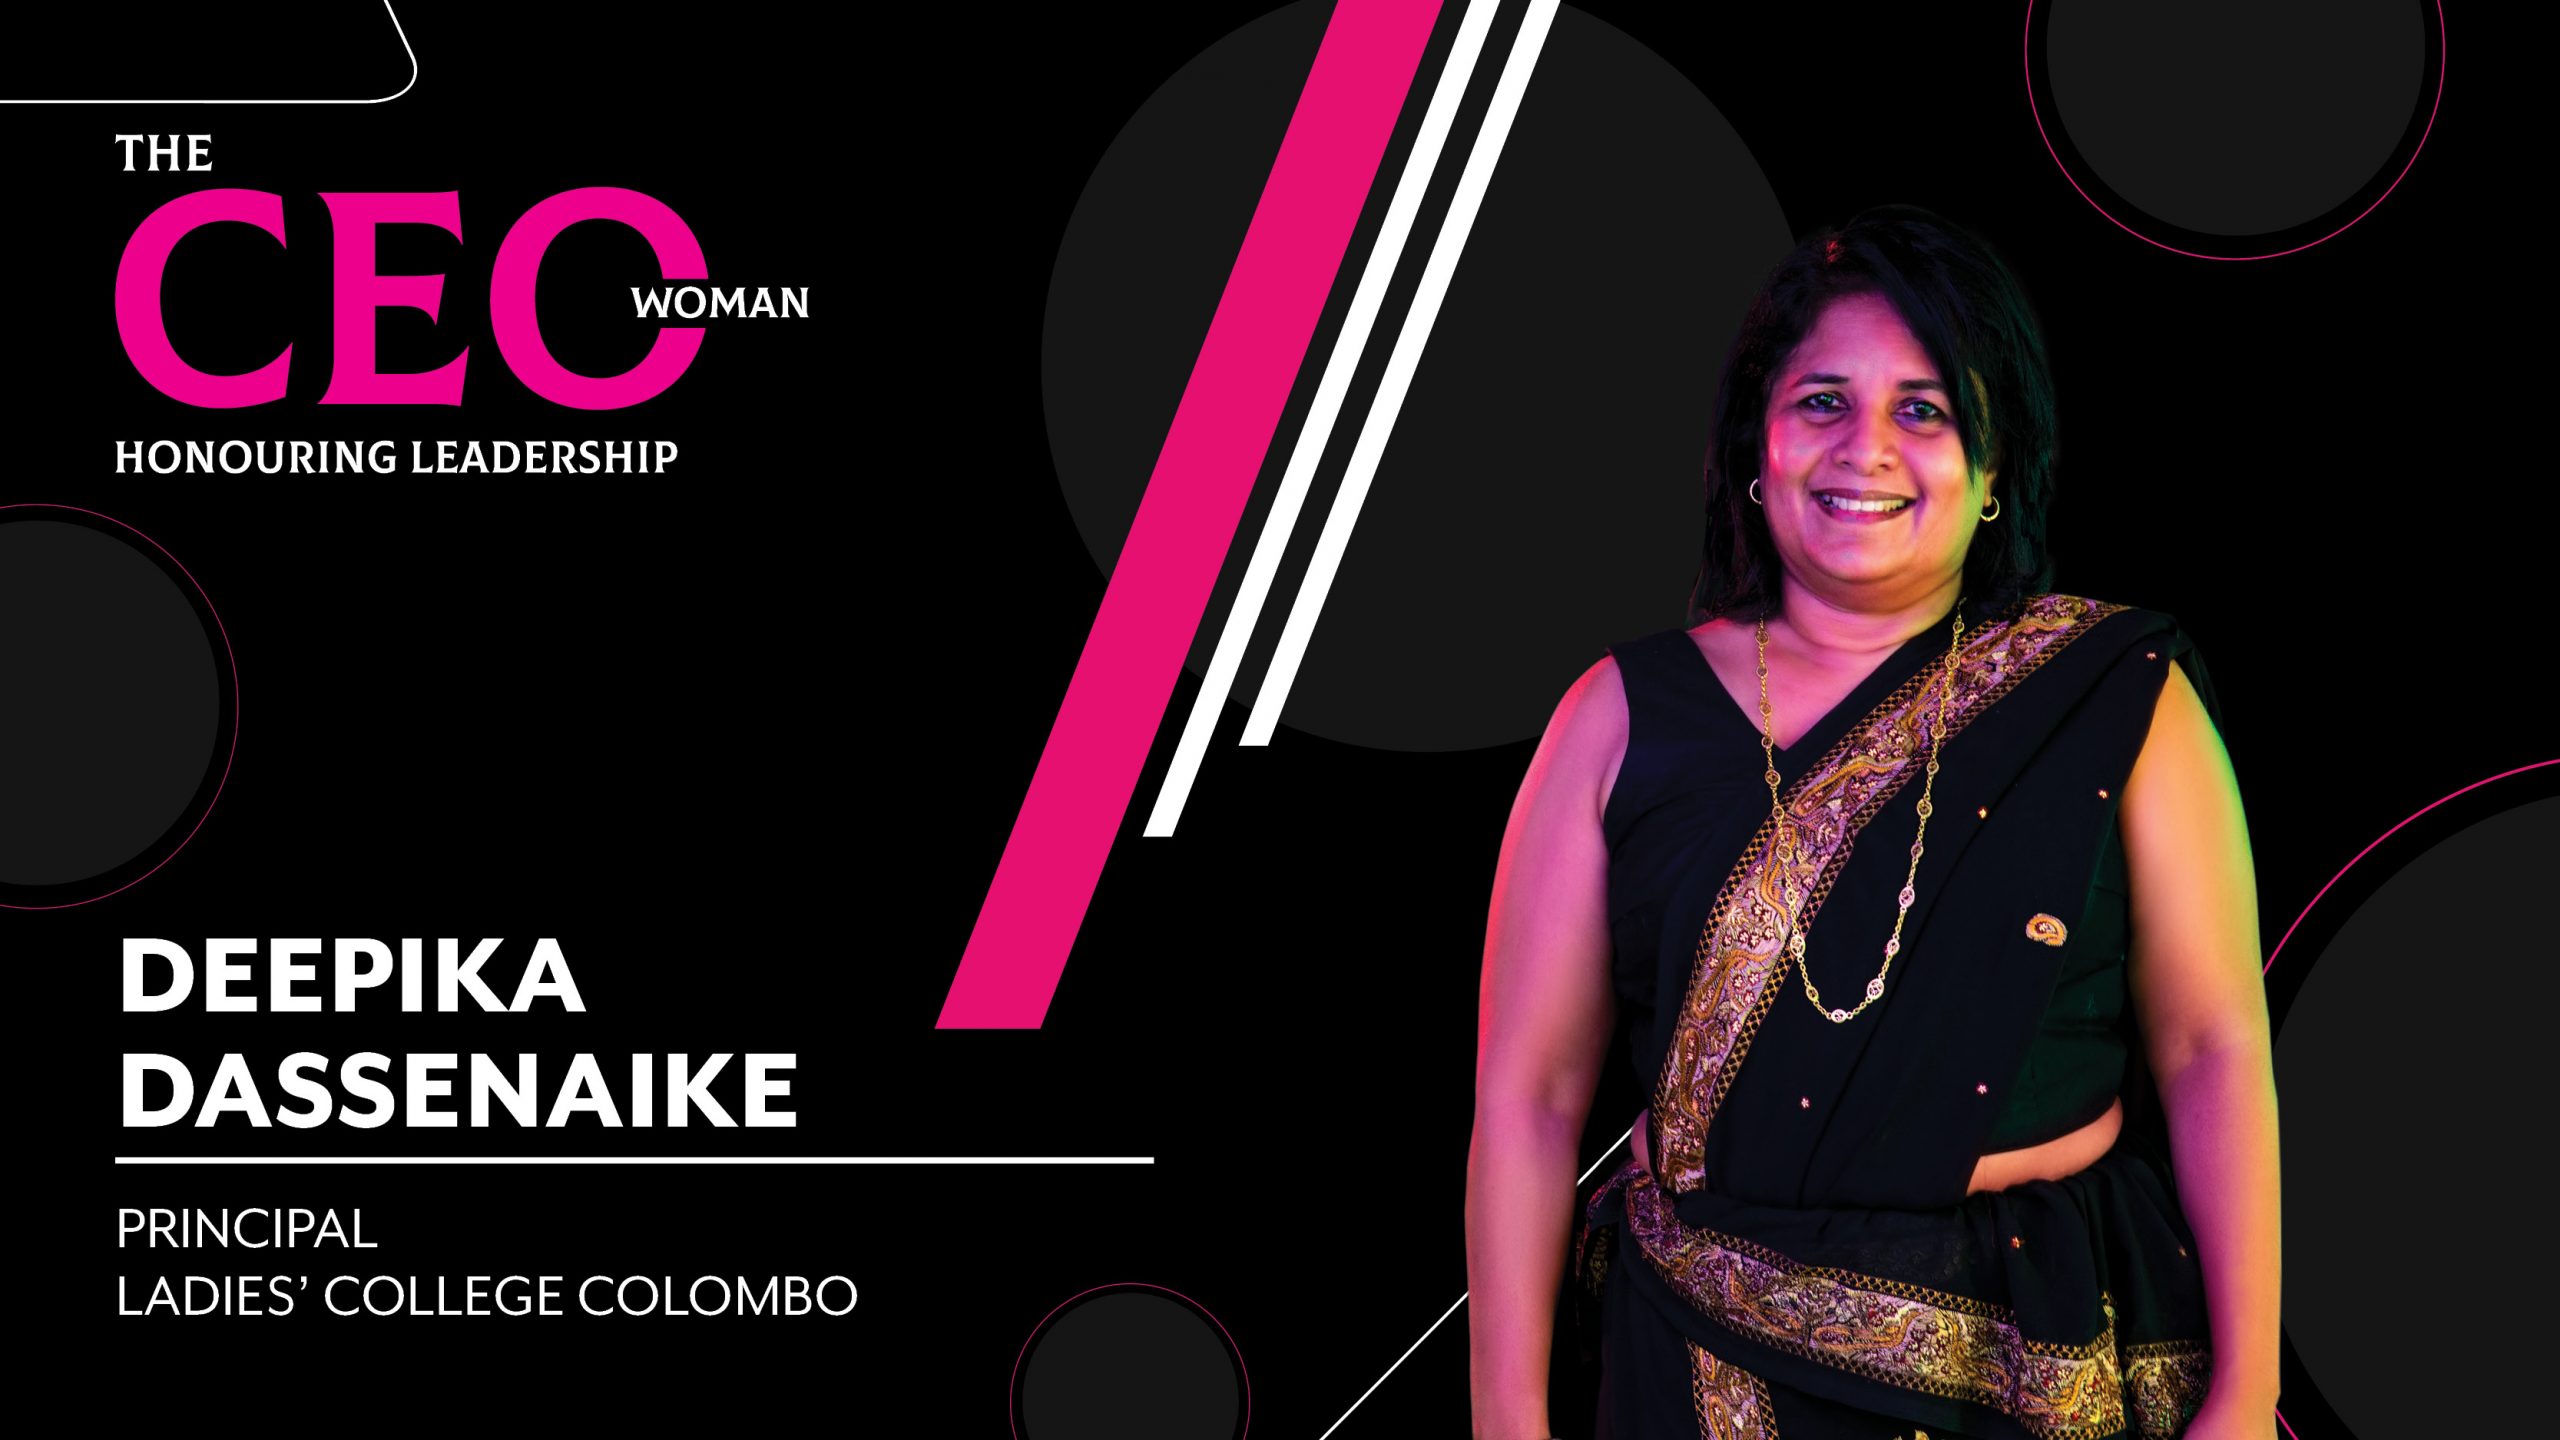 Steering the Victory Driven by Faith – Principal of Ladies’ College Colombo, Deepika Dassenaike